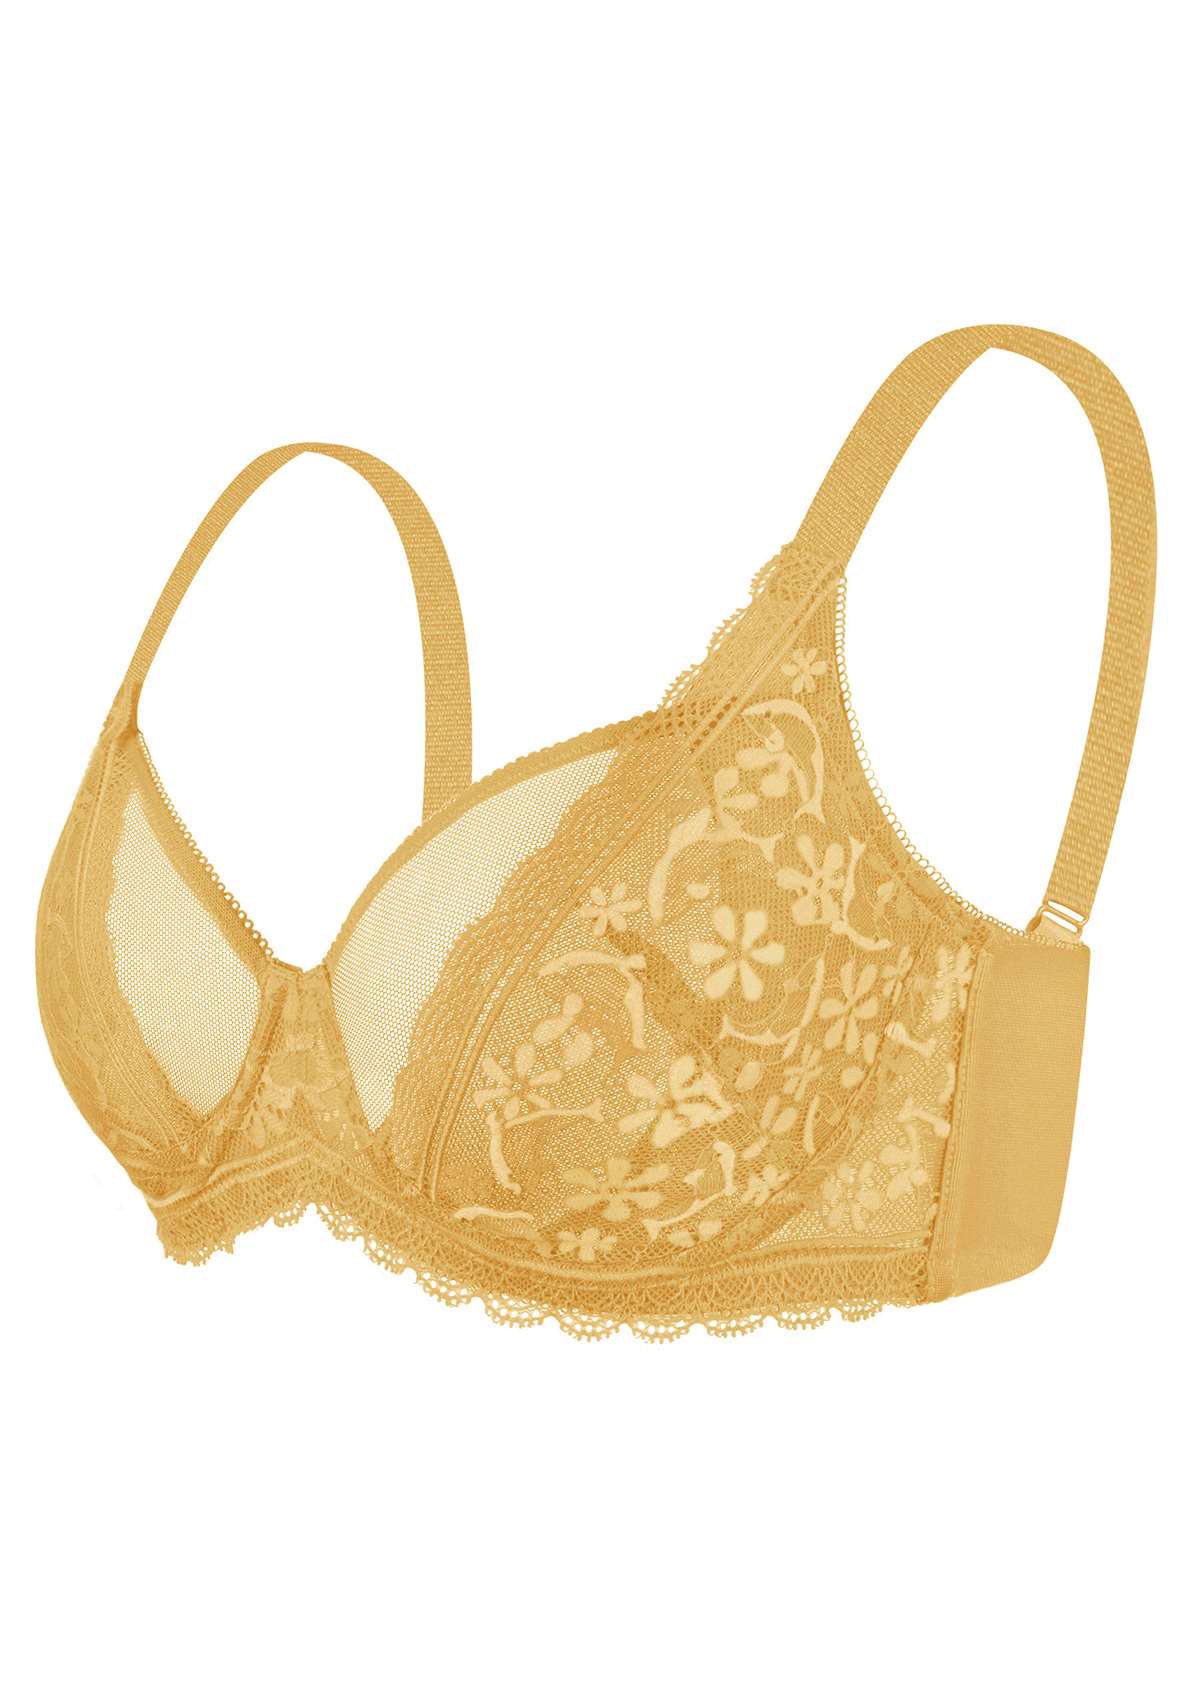 HSIA Anemone Lace Unlined Bra: Supportive, Lightweight Bra - Ginger / 40 / C